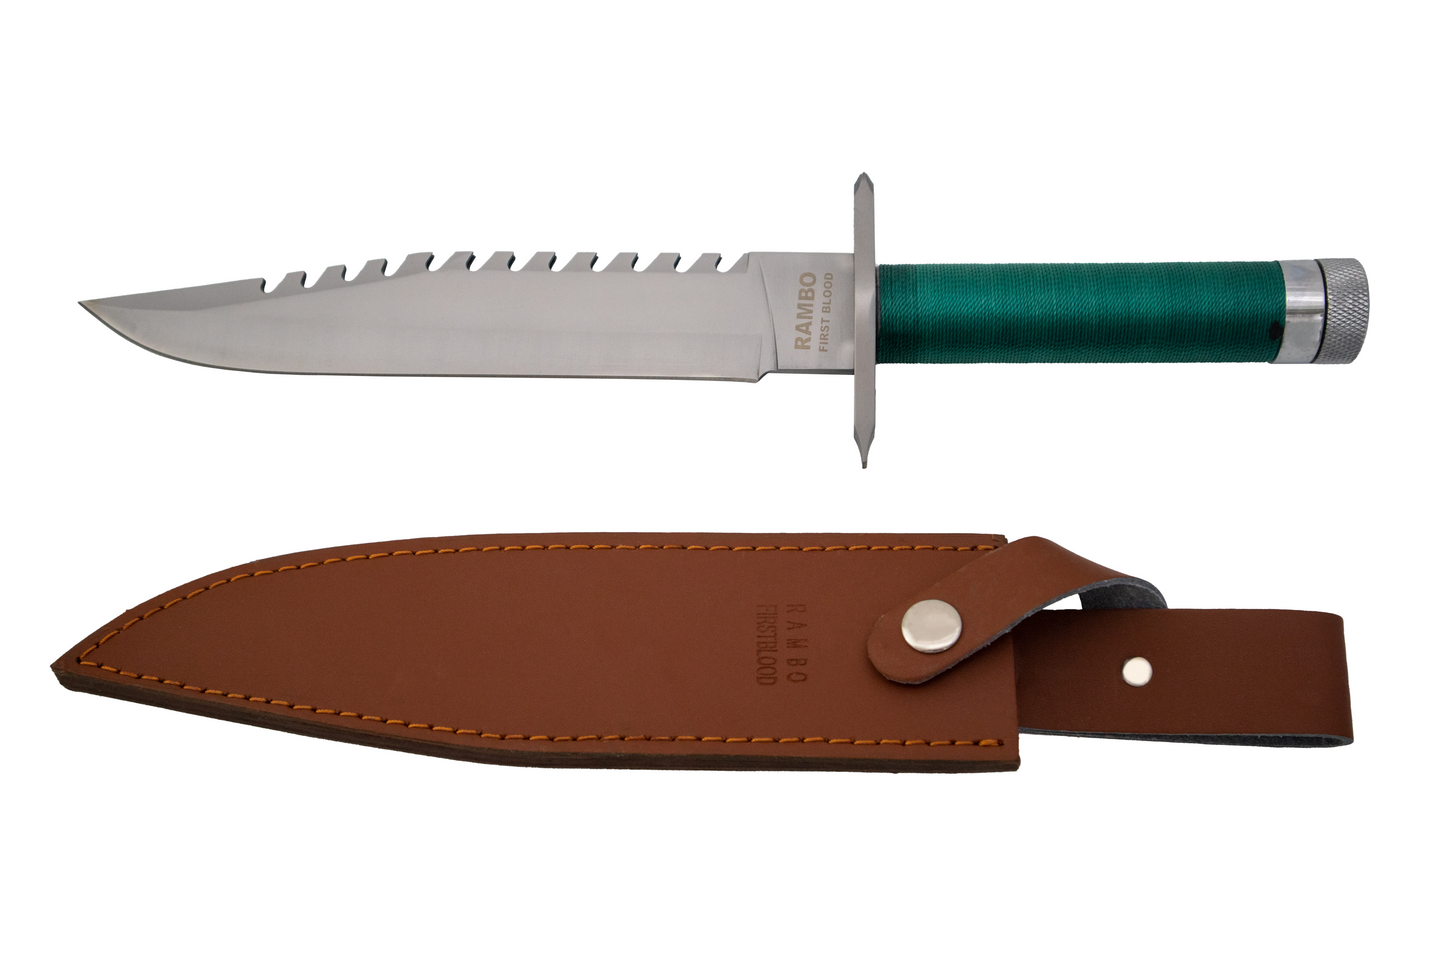 RAMBO FIRST BLOOD SURVIVAL HUNTING KNIFE DELUXE EDITION WITH LEATHER SHEATH